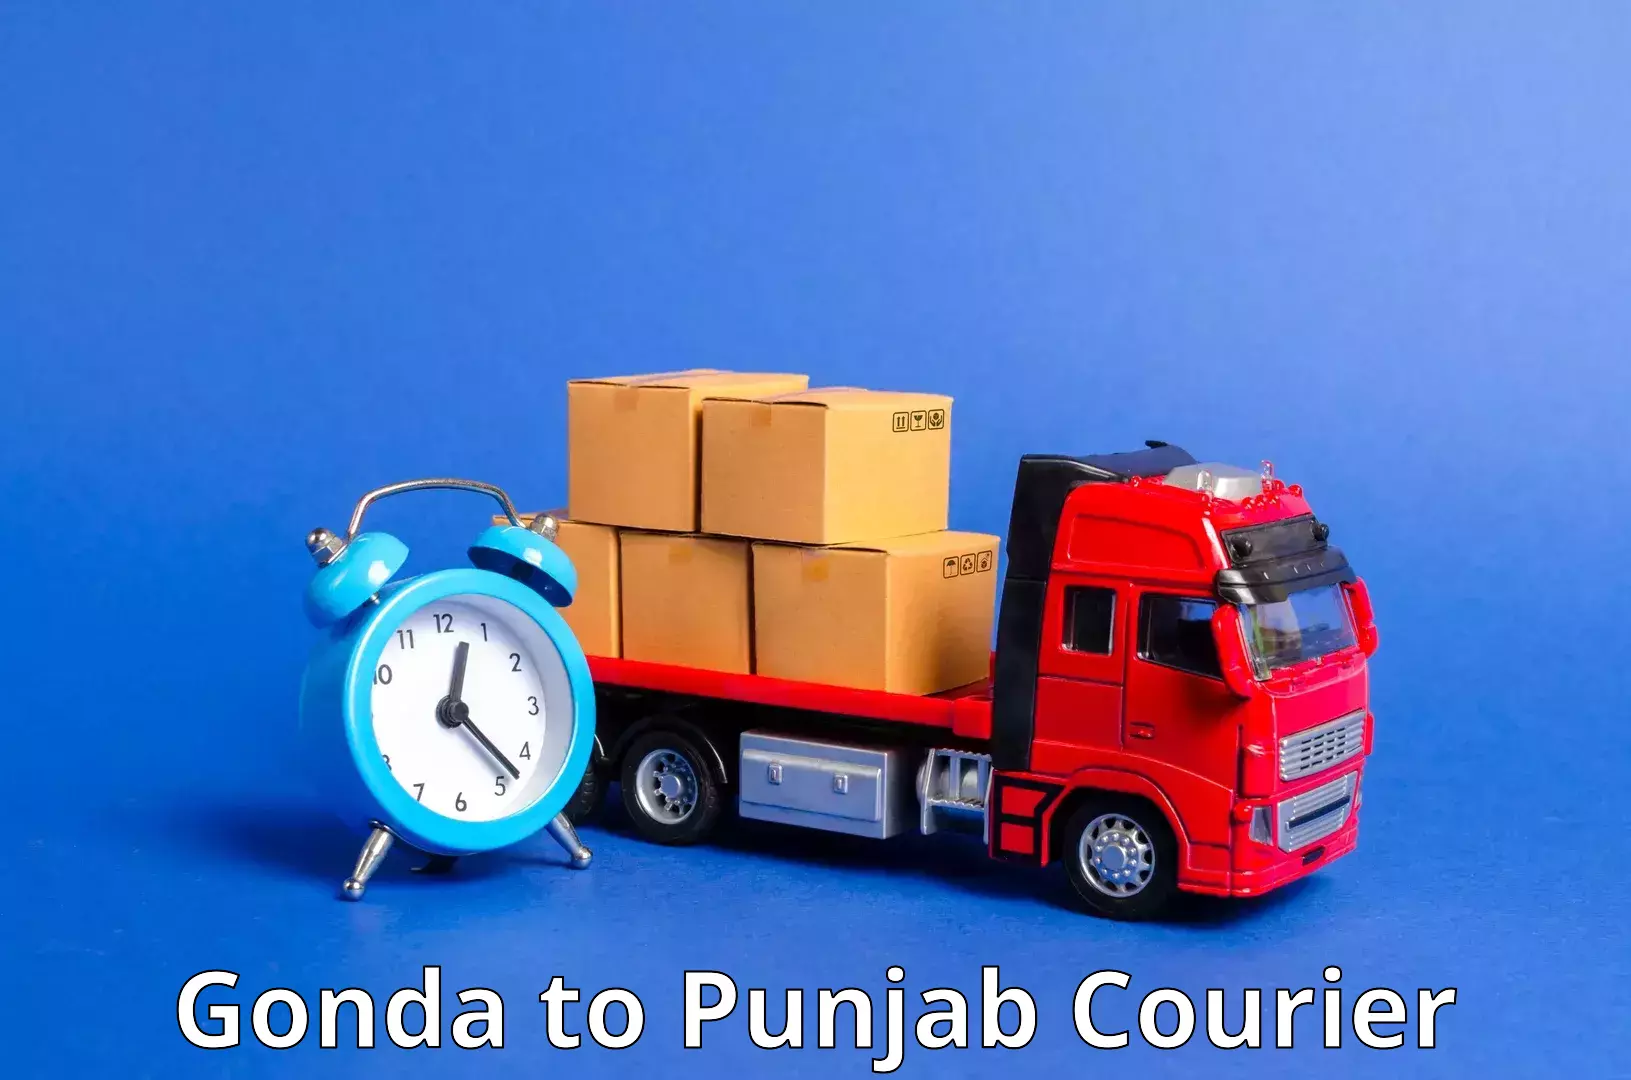 Courier service efficiency Gonda to Malout